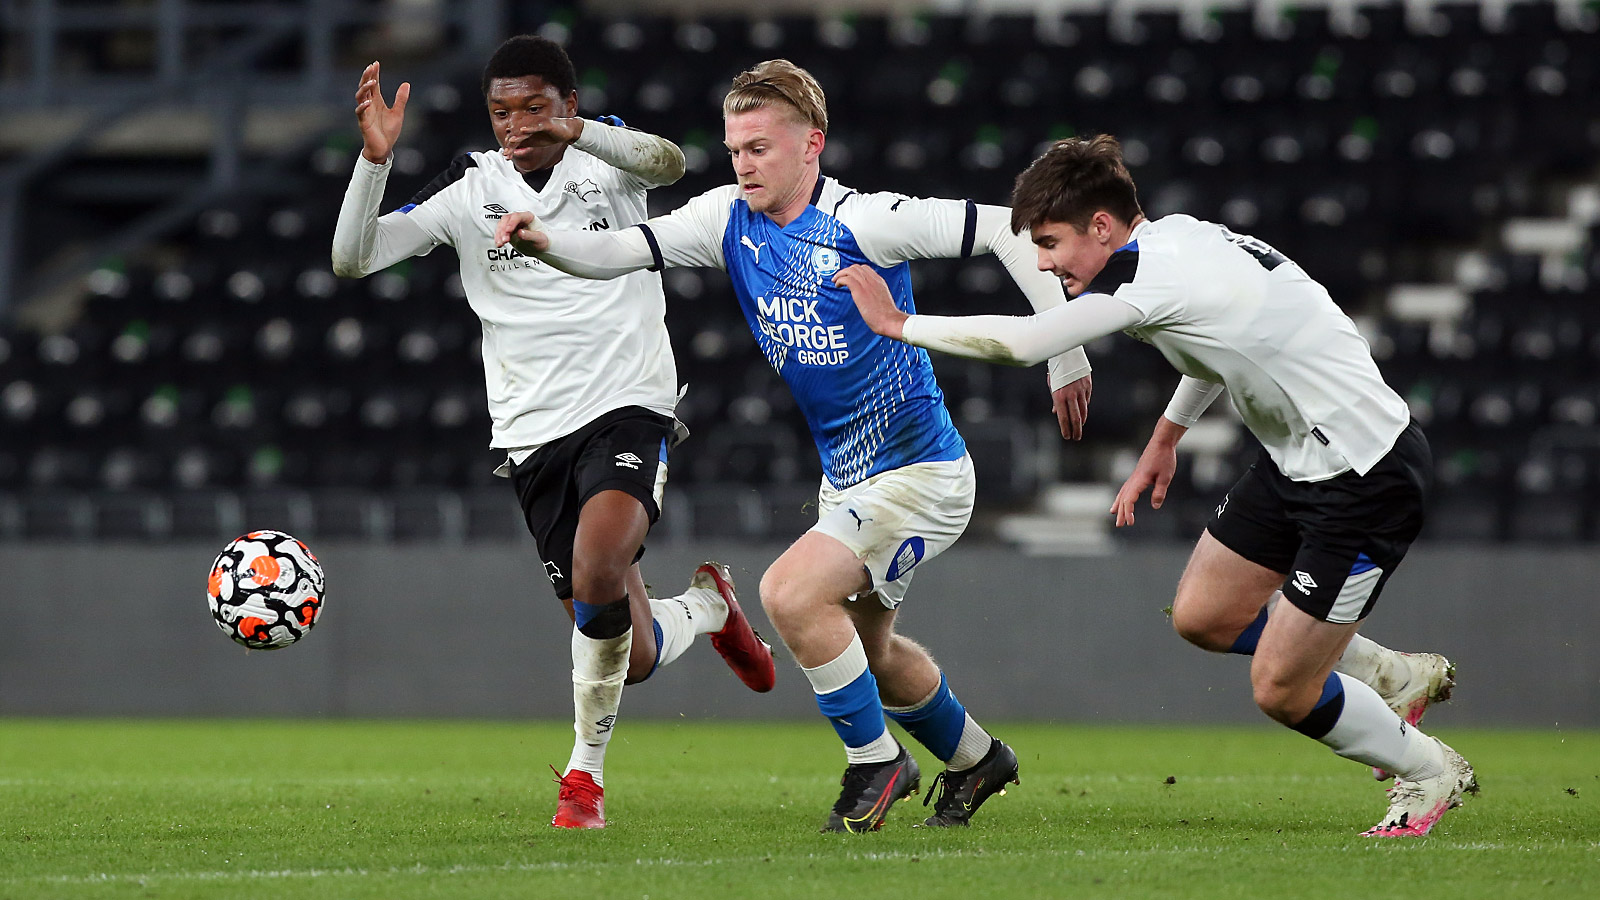 Kellan Hickinson in action against Derby County in the FA Youth Cup